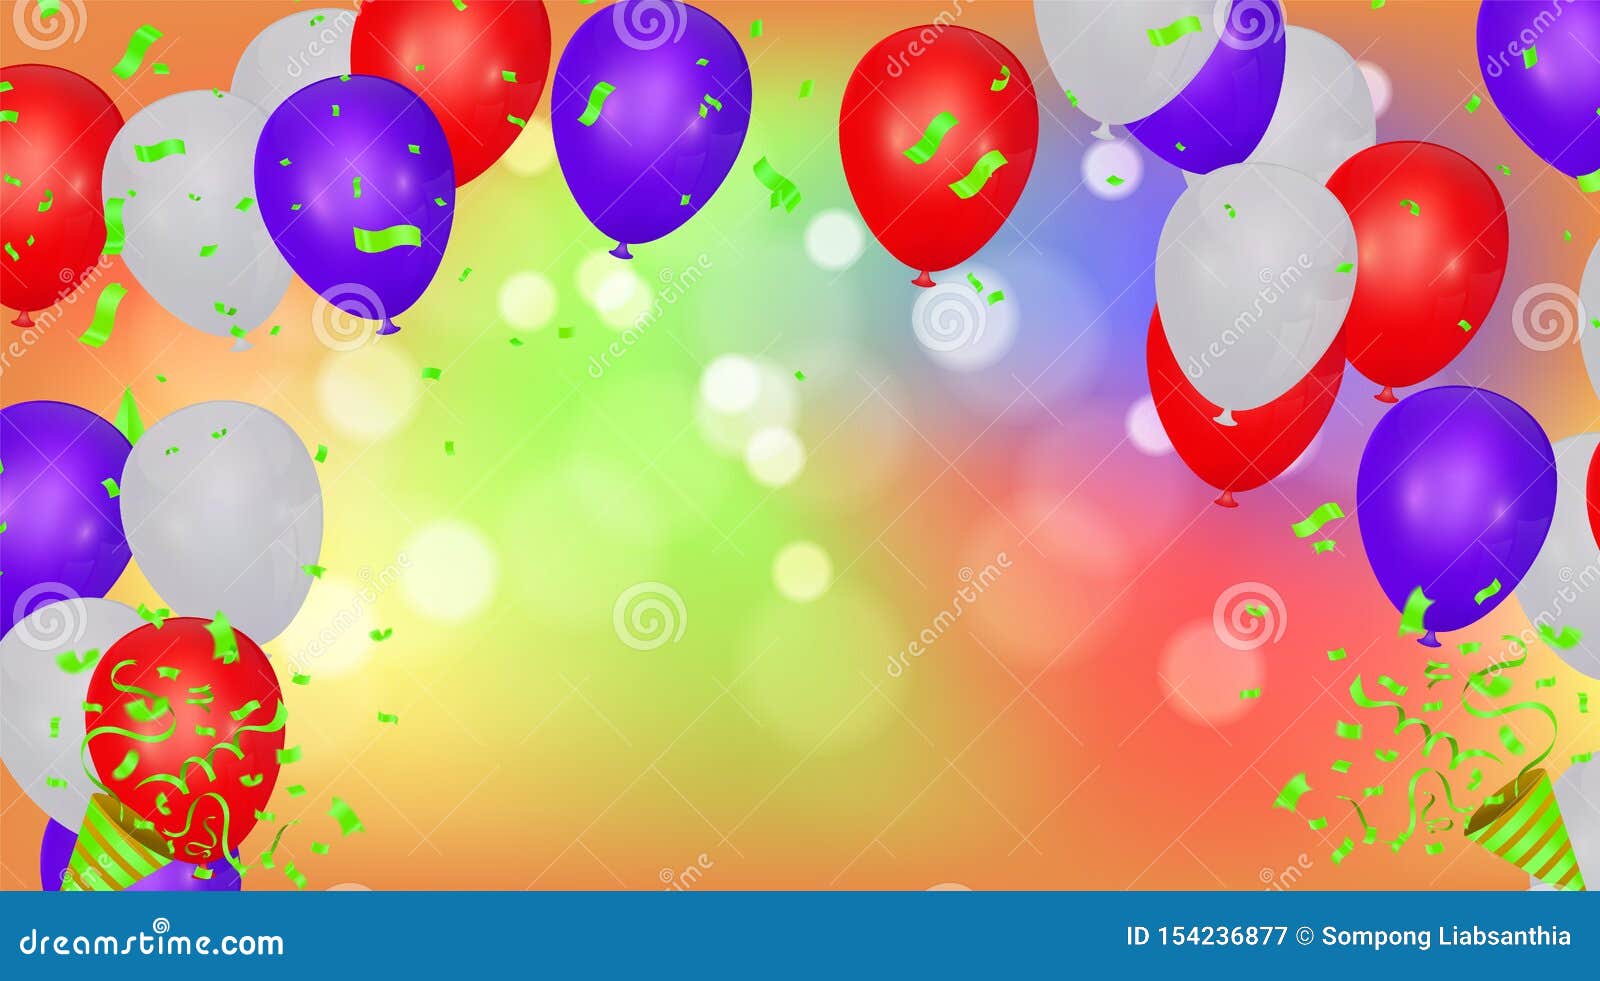 Happy Birthday Backgrounds Grand Opening Ceremony Vector Banner. Realistic  Glossy Balloons, Confetti Stock Vector - Illustration of beautiful,  confetti: 154236877